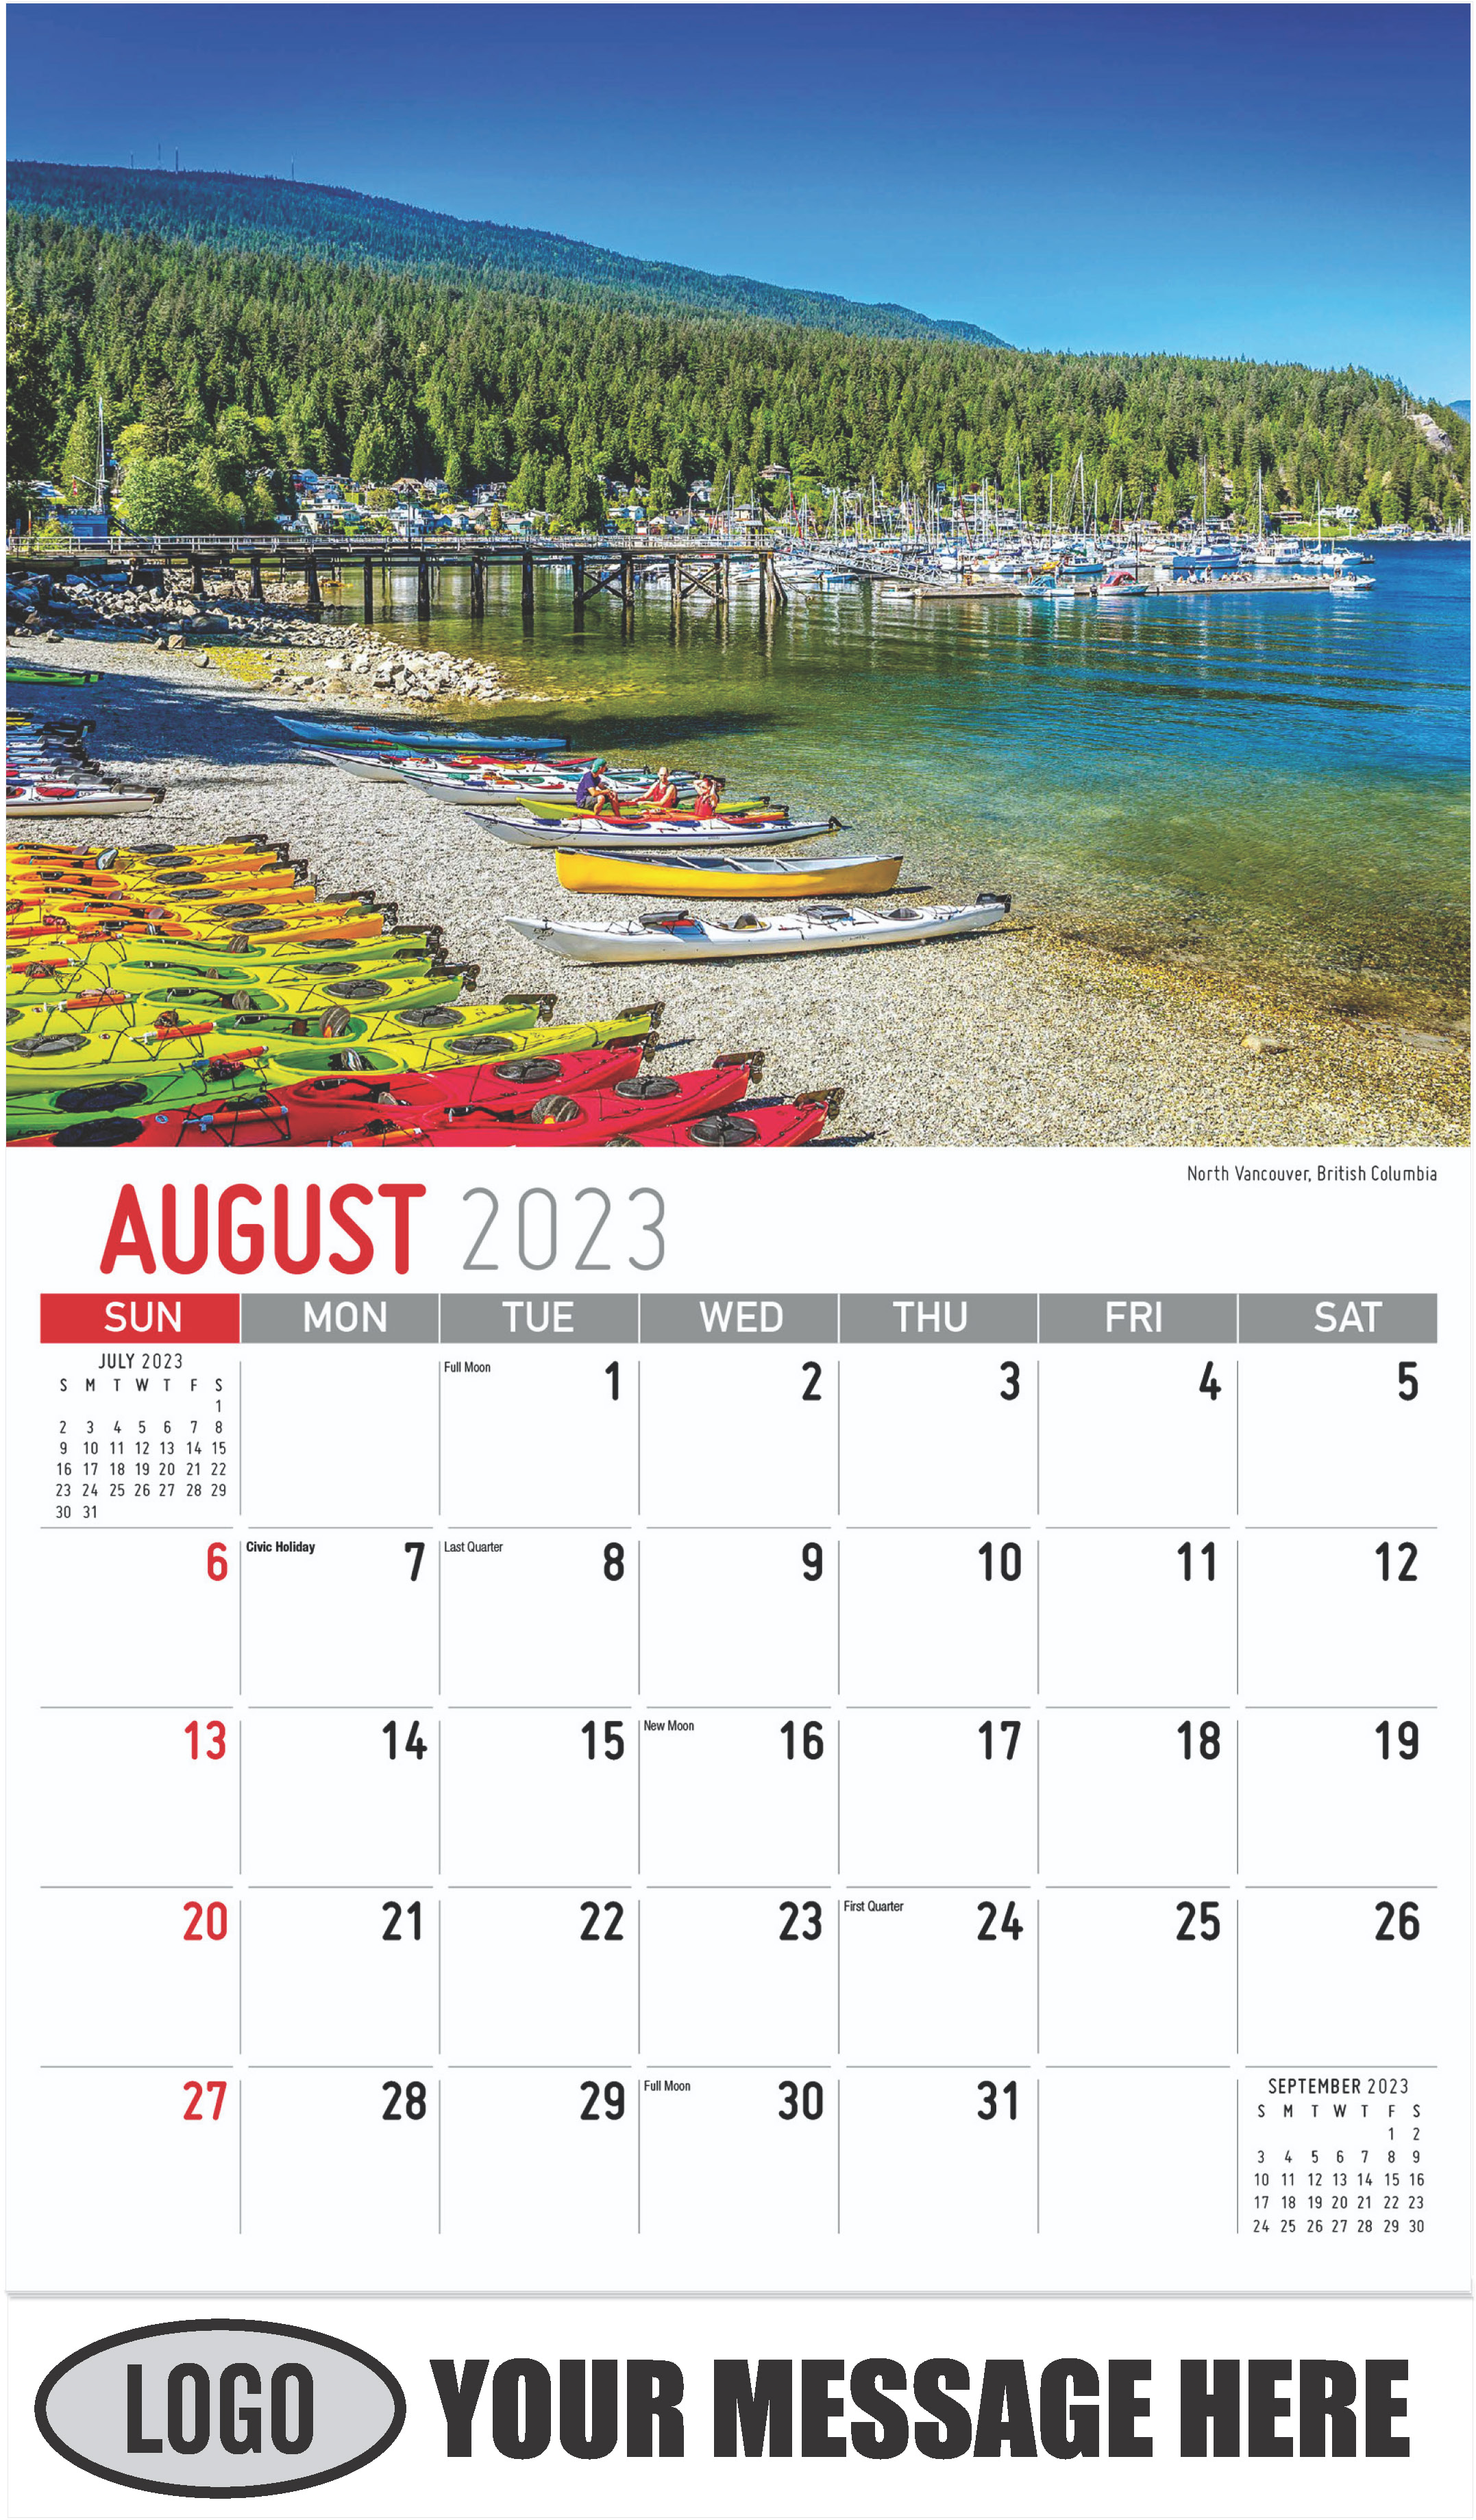 North Vancouver, British Columbia - August - Scenes of Western Canada 2023 Promotional Calendar